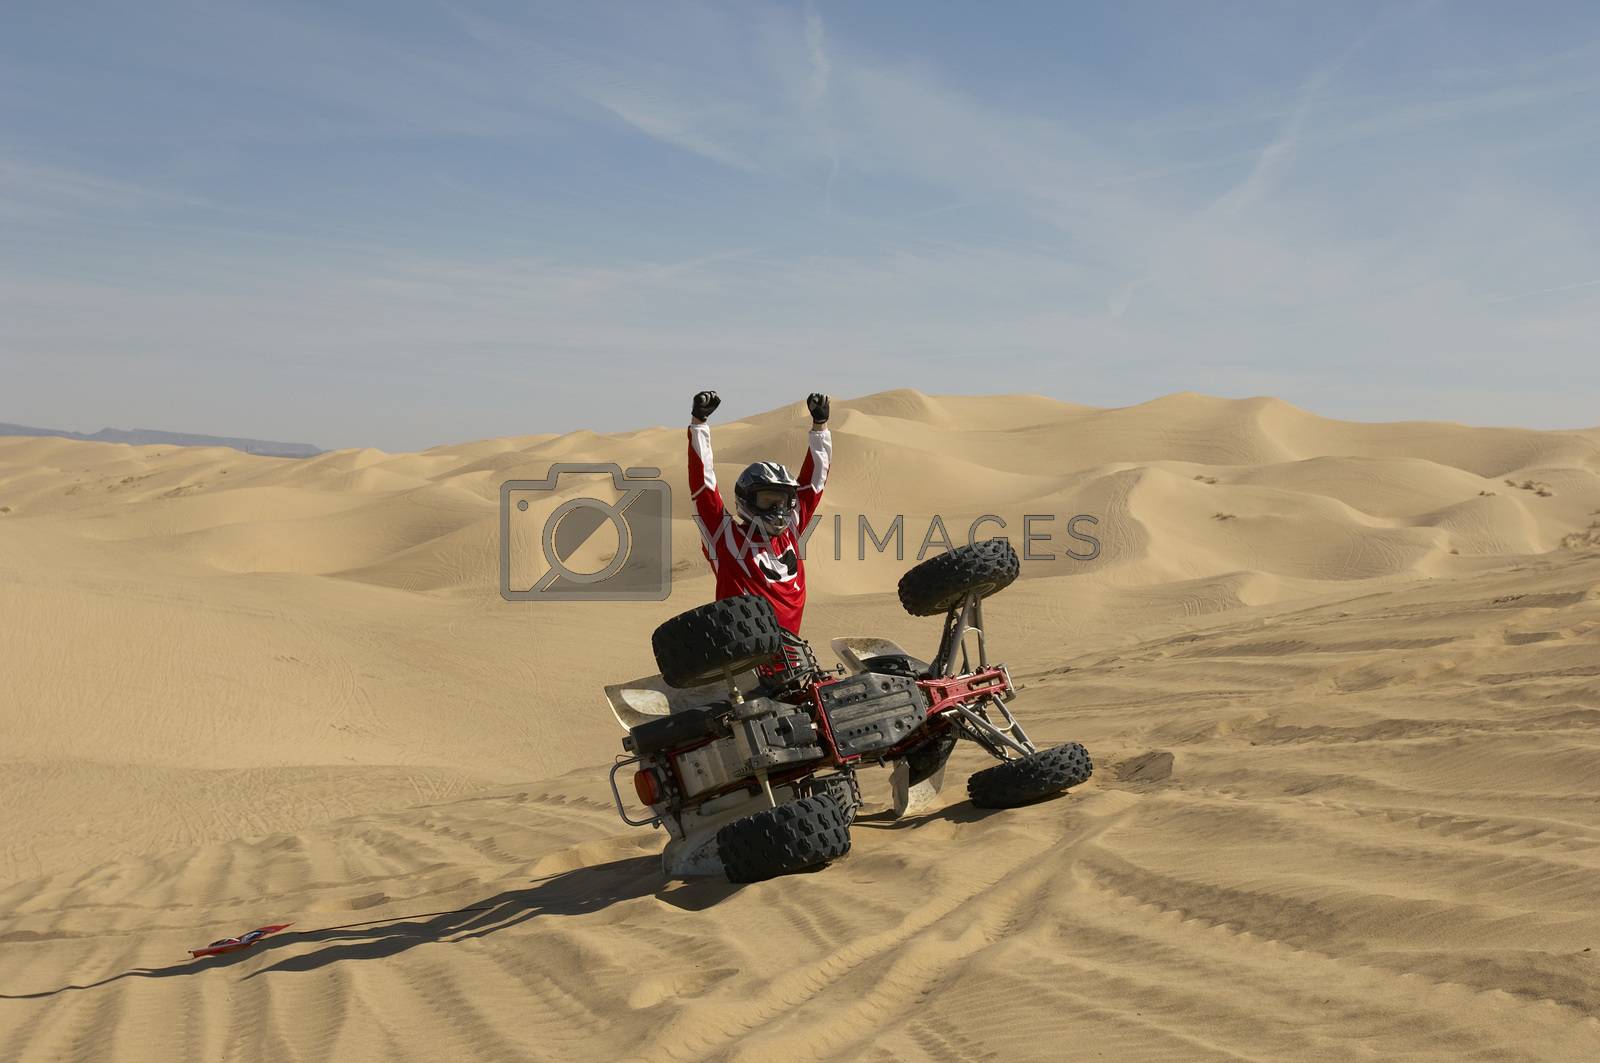 Royalty free image of Male quad racer cheering tipped-over quad bike in desert by moodboard